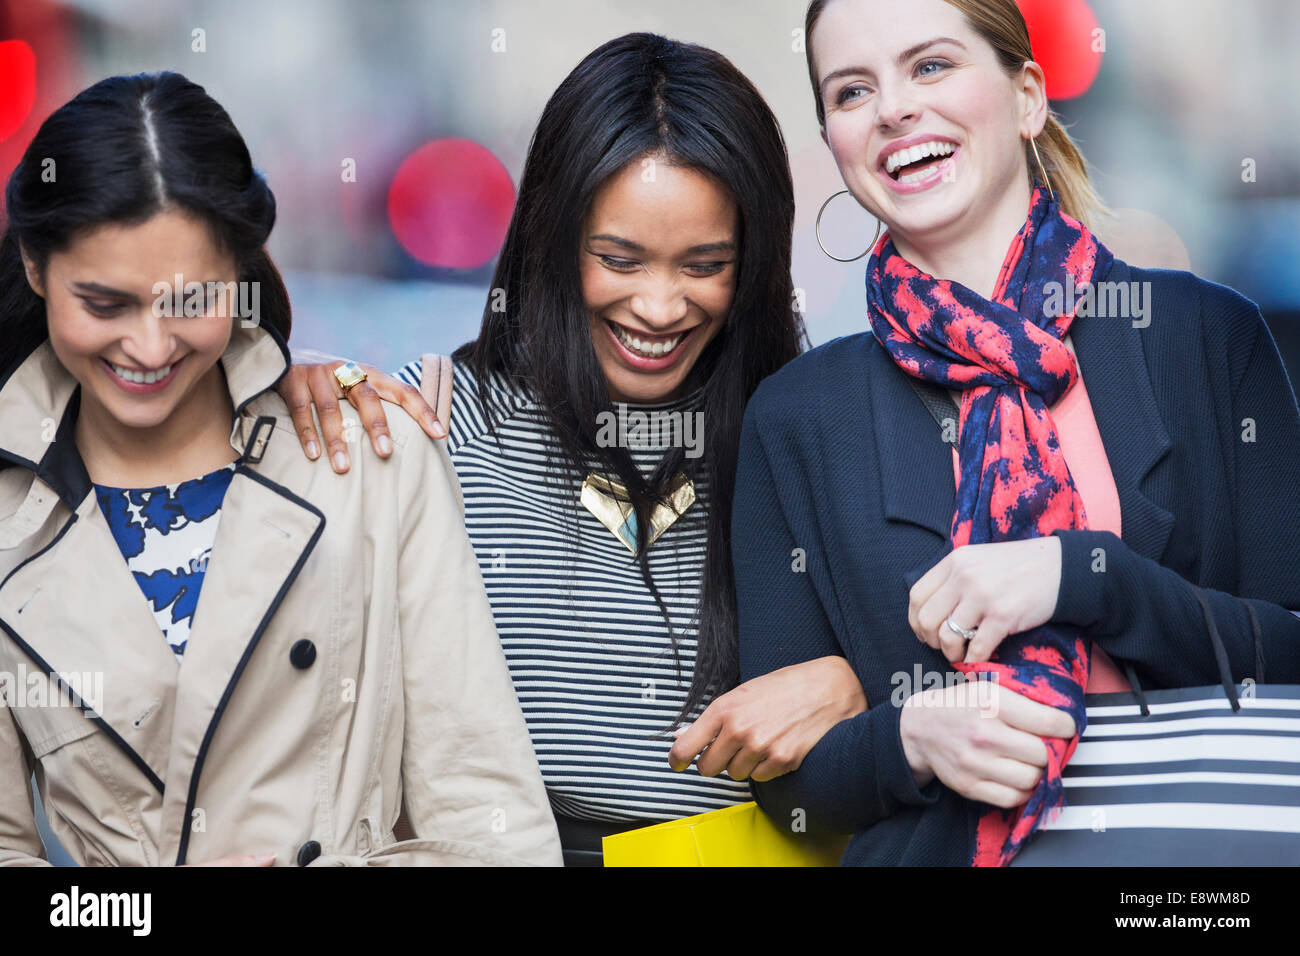 Women laughing on city street together Stock Photo